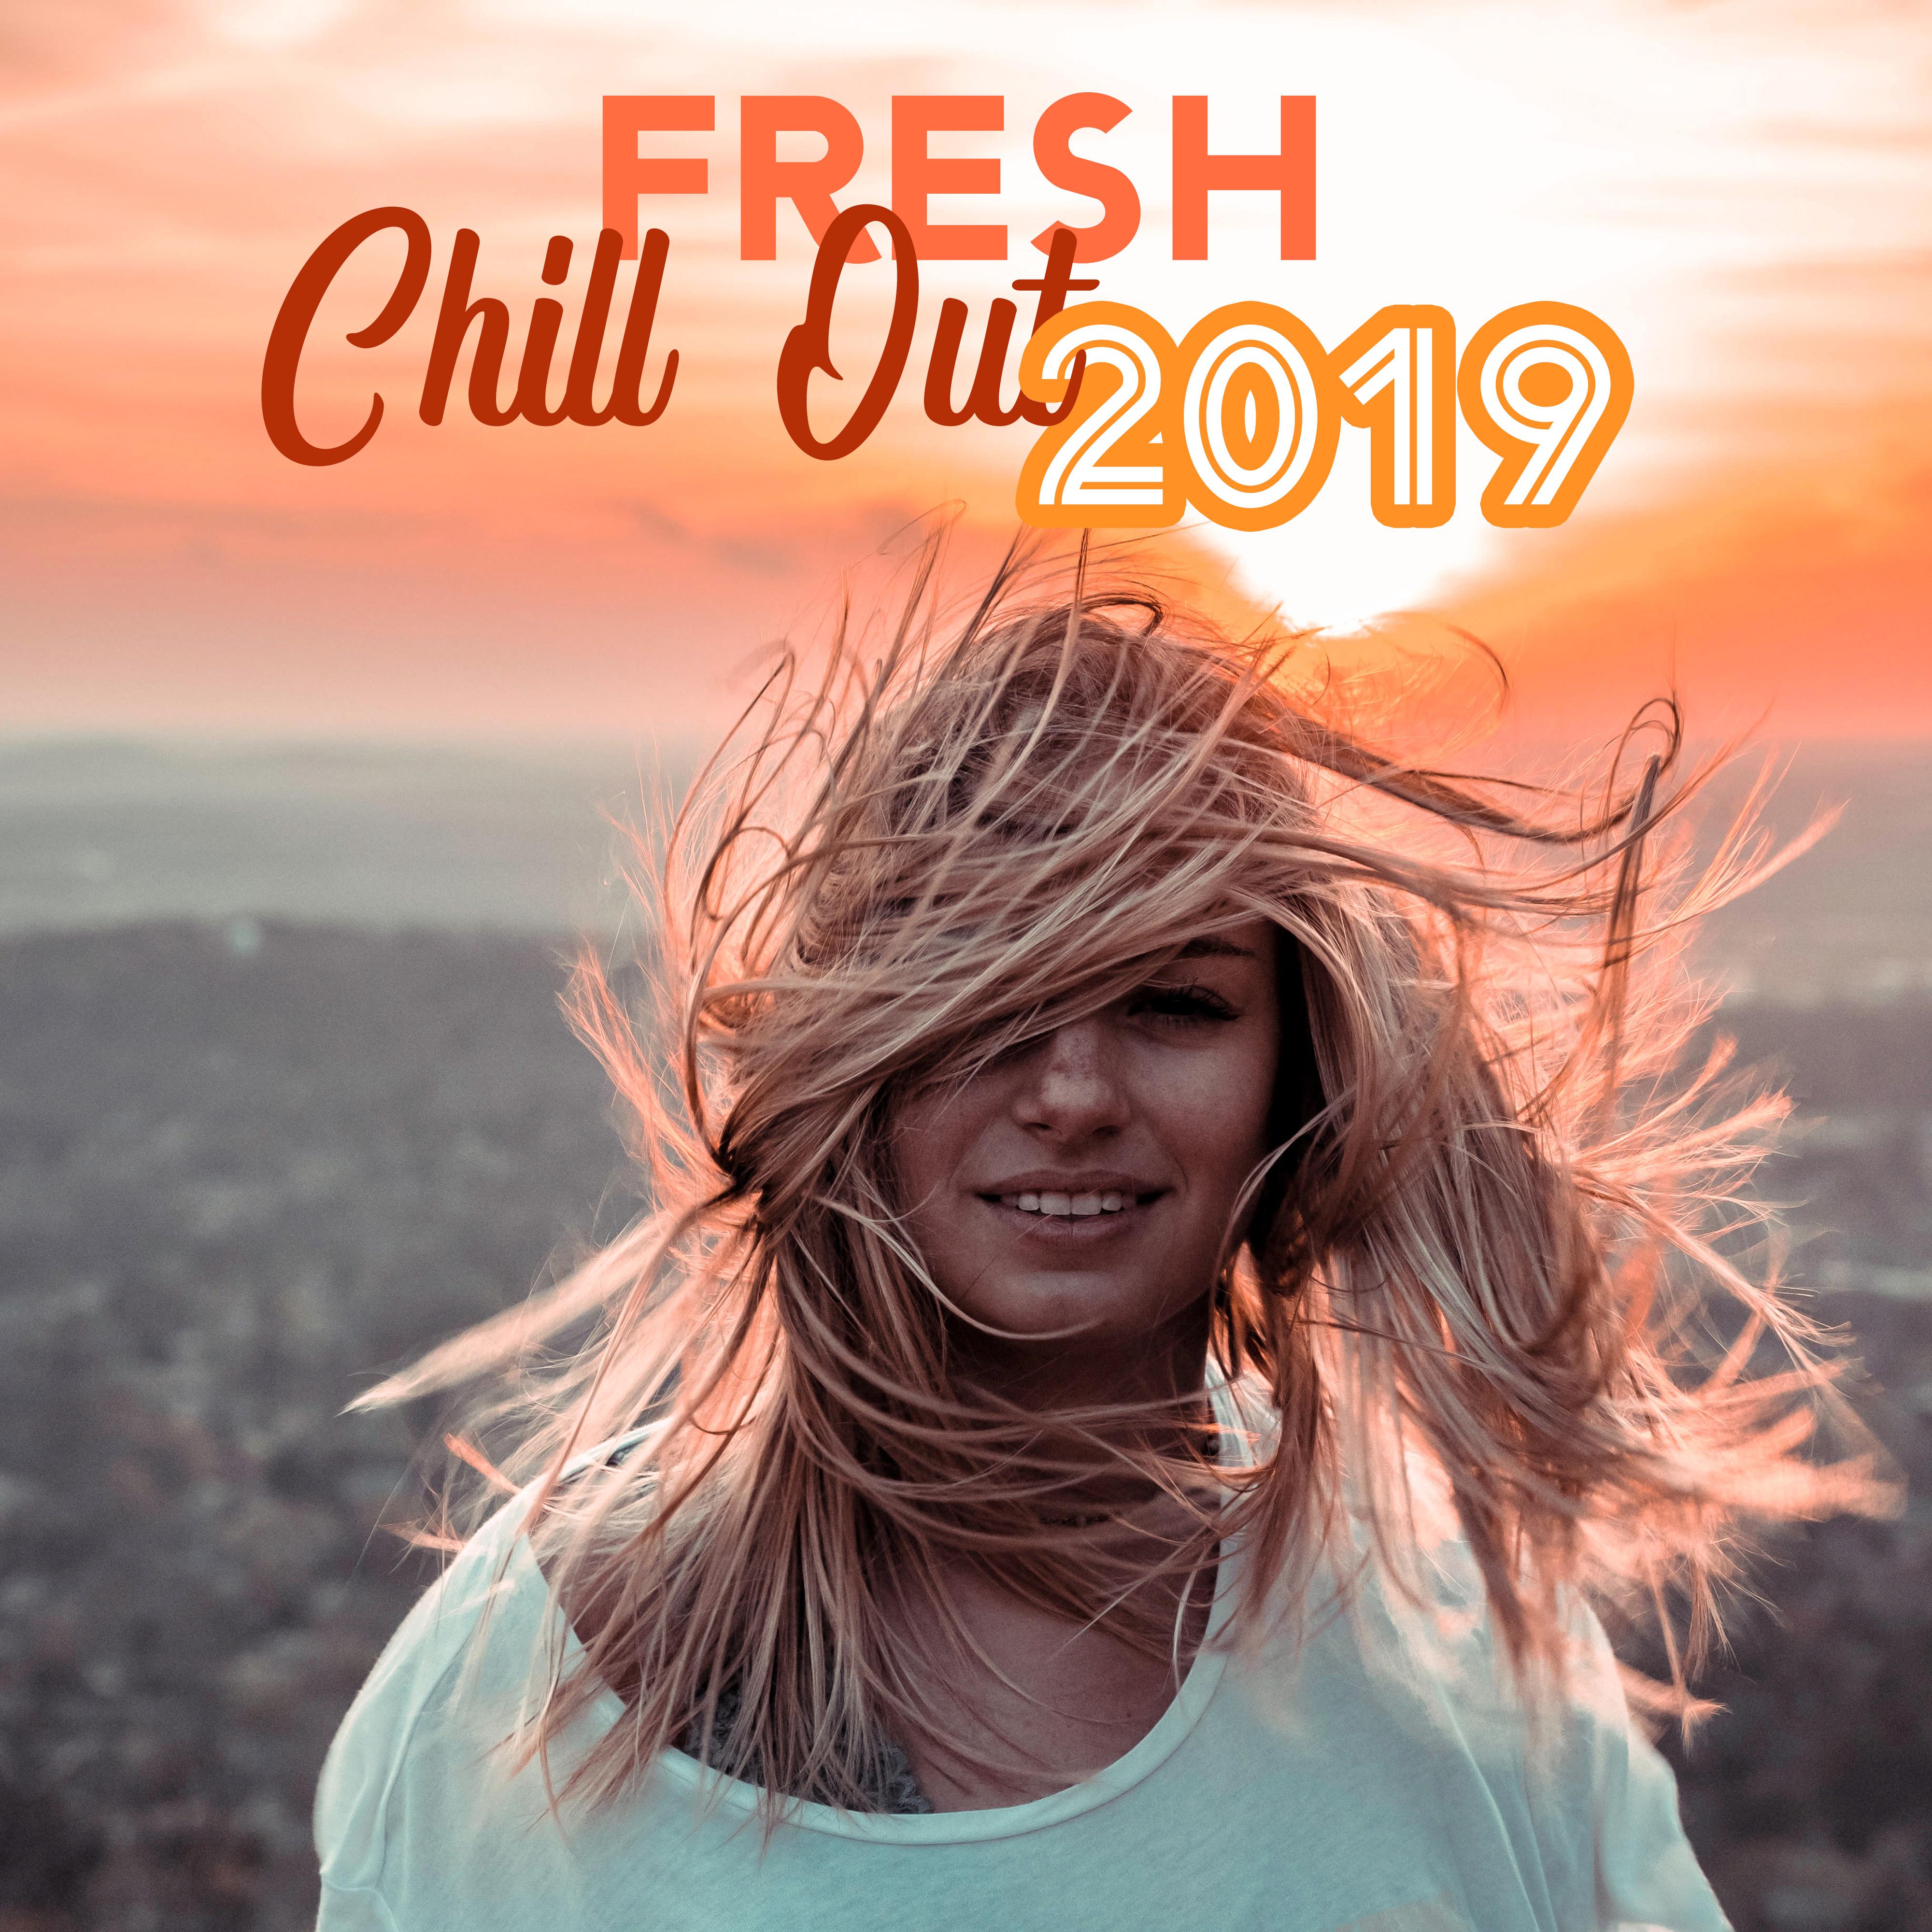 Fresh Chill Out 2019: Summer Music, Beach Lounge, Ibiza Relaxation, Modern Chillout Mix, Relax, Relaxing Vibes